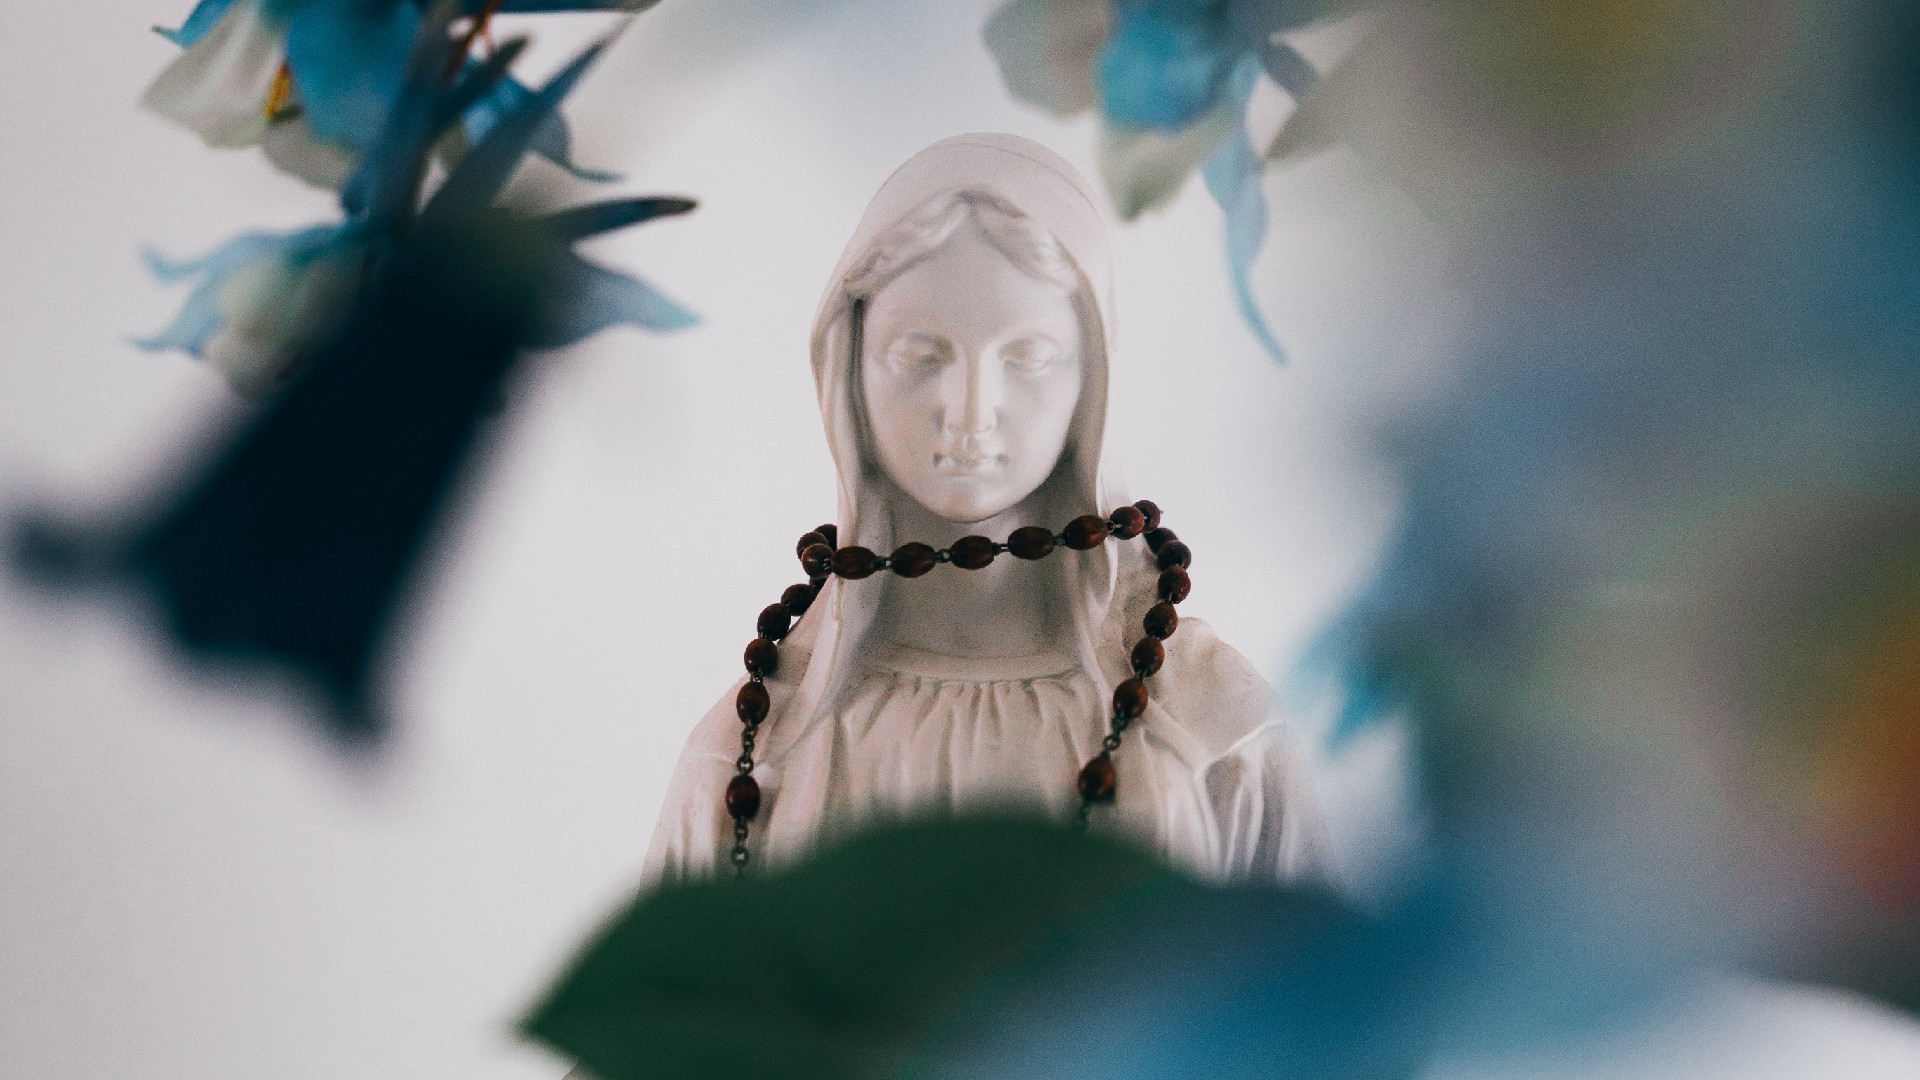 A statue of the Virgin Mary with rosary beads draped around it.